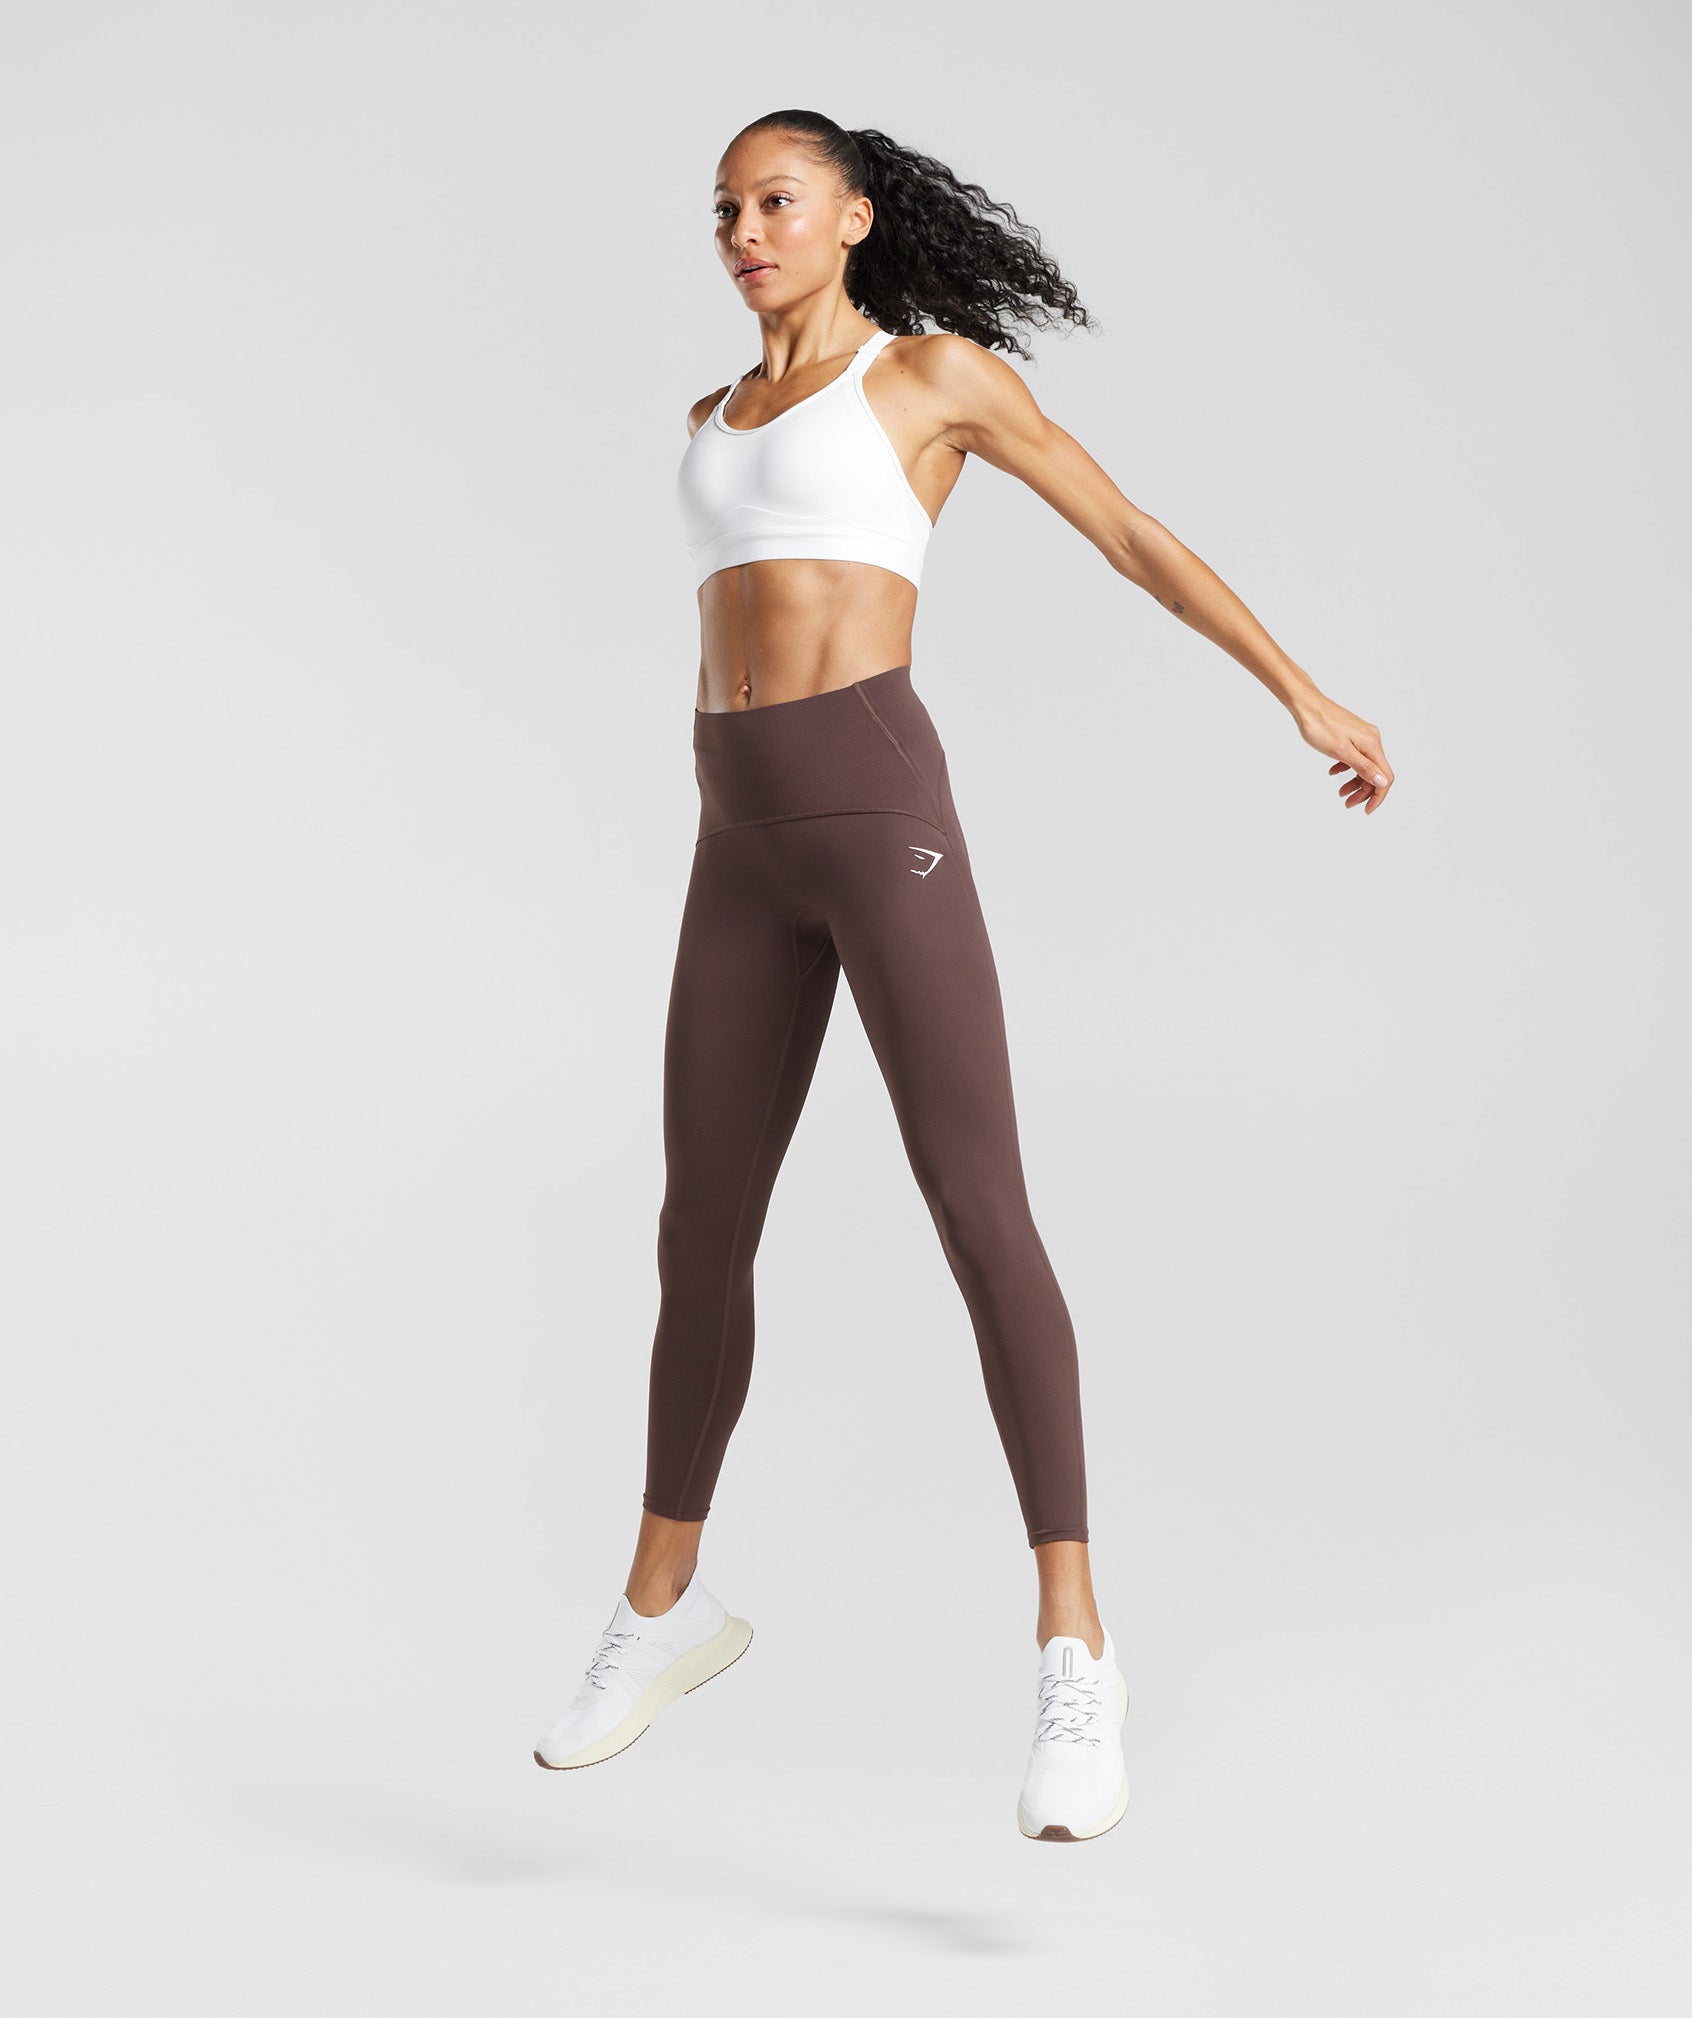 Waist Support Leggings in Chocolate Brown - view 4